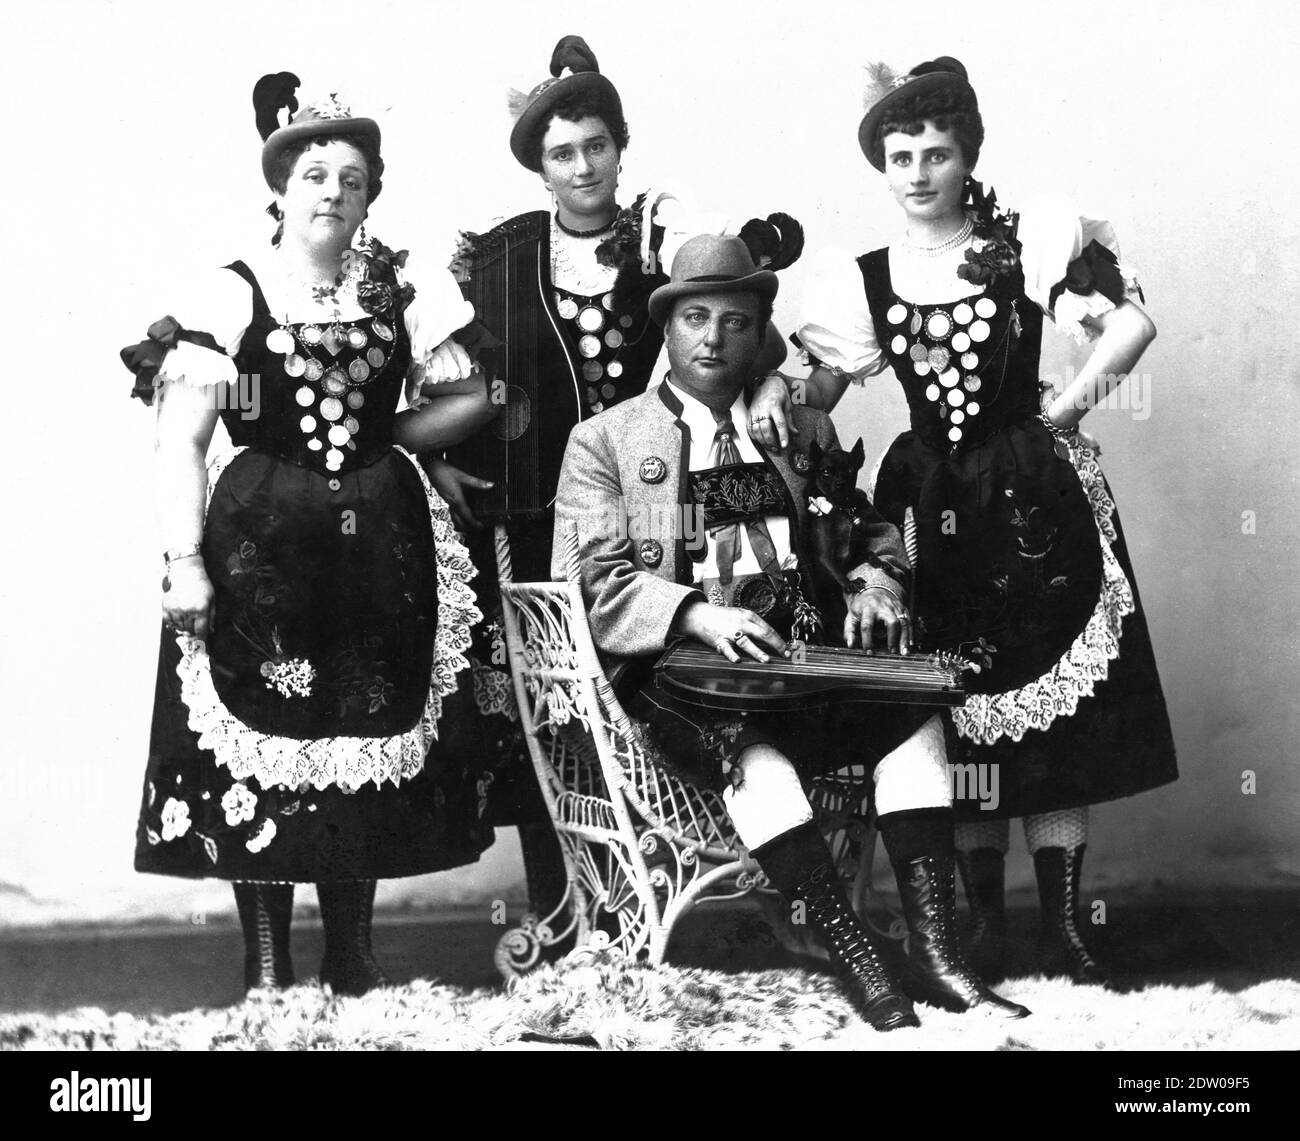 'Franz Reilhofer's Alpine Yodlers' circa 1885, in Chicago, Illinois, USA. Franz's group, under various names, traveled extensively playing and singing in their Tyrolean costumes. They played vaudeville and all sorts of local events such as music shows, town celebrations, etc.  Similarly as did many circus performers, this musical group carried lots of photos to be sold to audience members to supplement their performance income. This photo is on a cream-colored cabinet card.  To see my other music-related images, Search:  Prestor  vintage  music Stock Photo